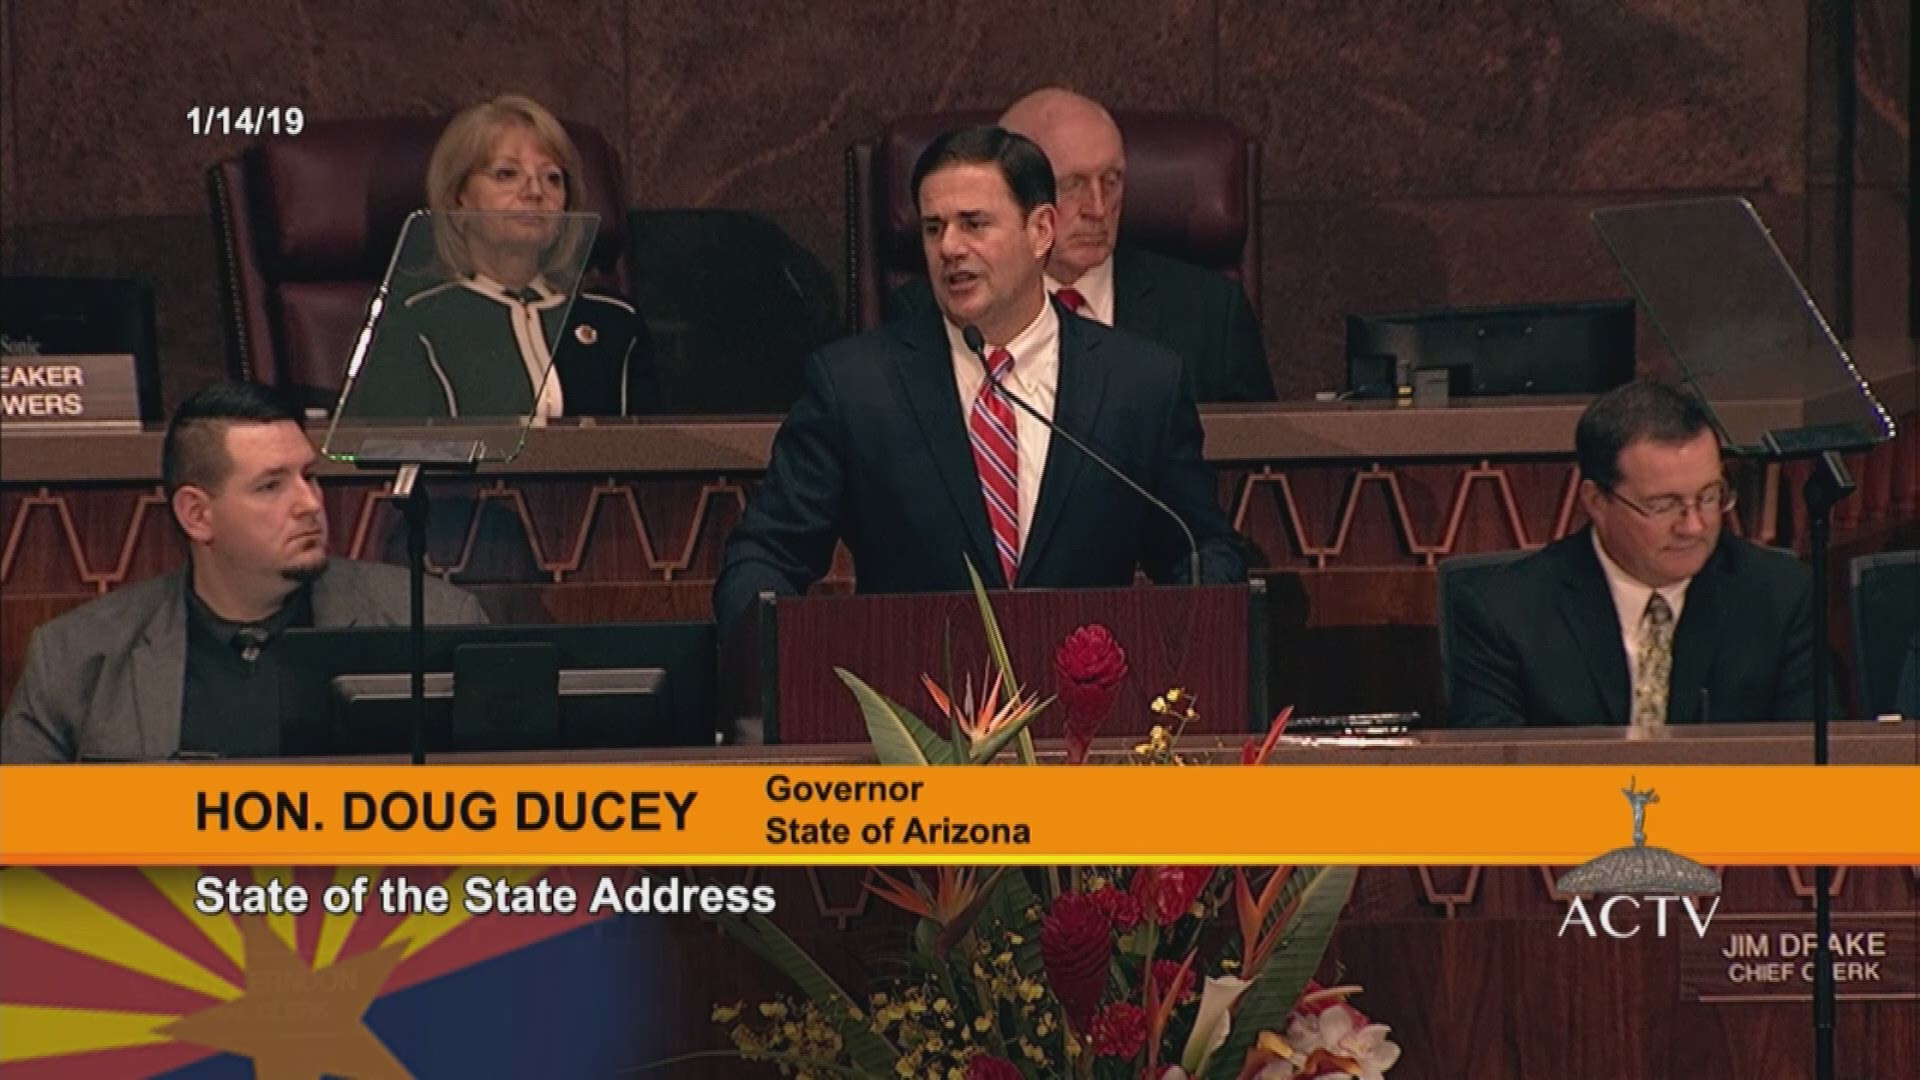 In his 2019 State of the State address, Arizona Governor Doug Ducey called on state lawmakers to pass legislation that would eliminate legislative immunity. He said no one was above the law, including lawmakers.